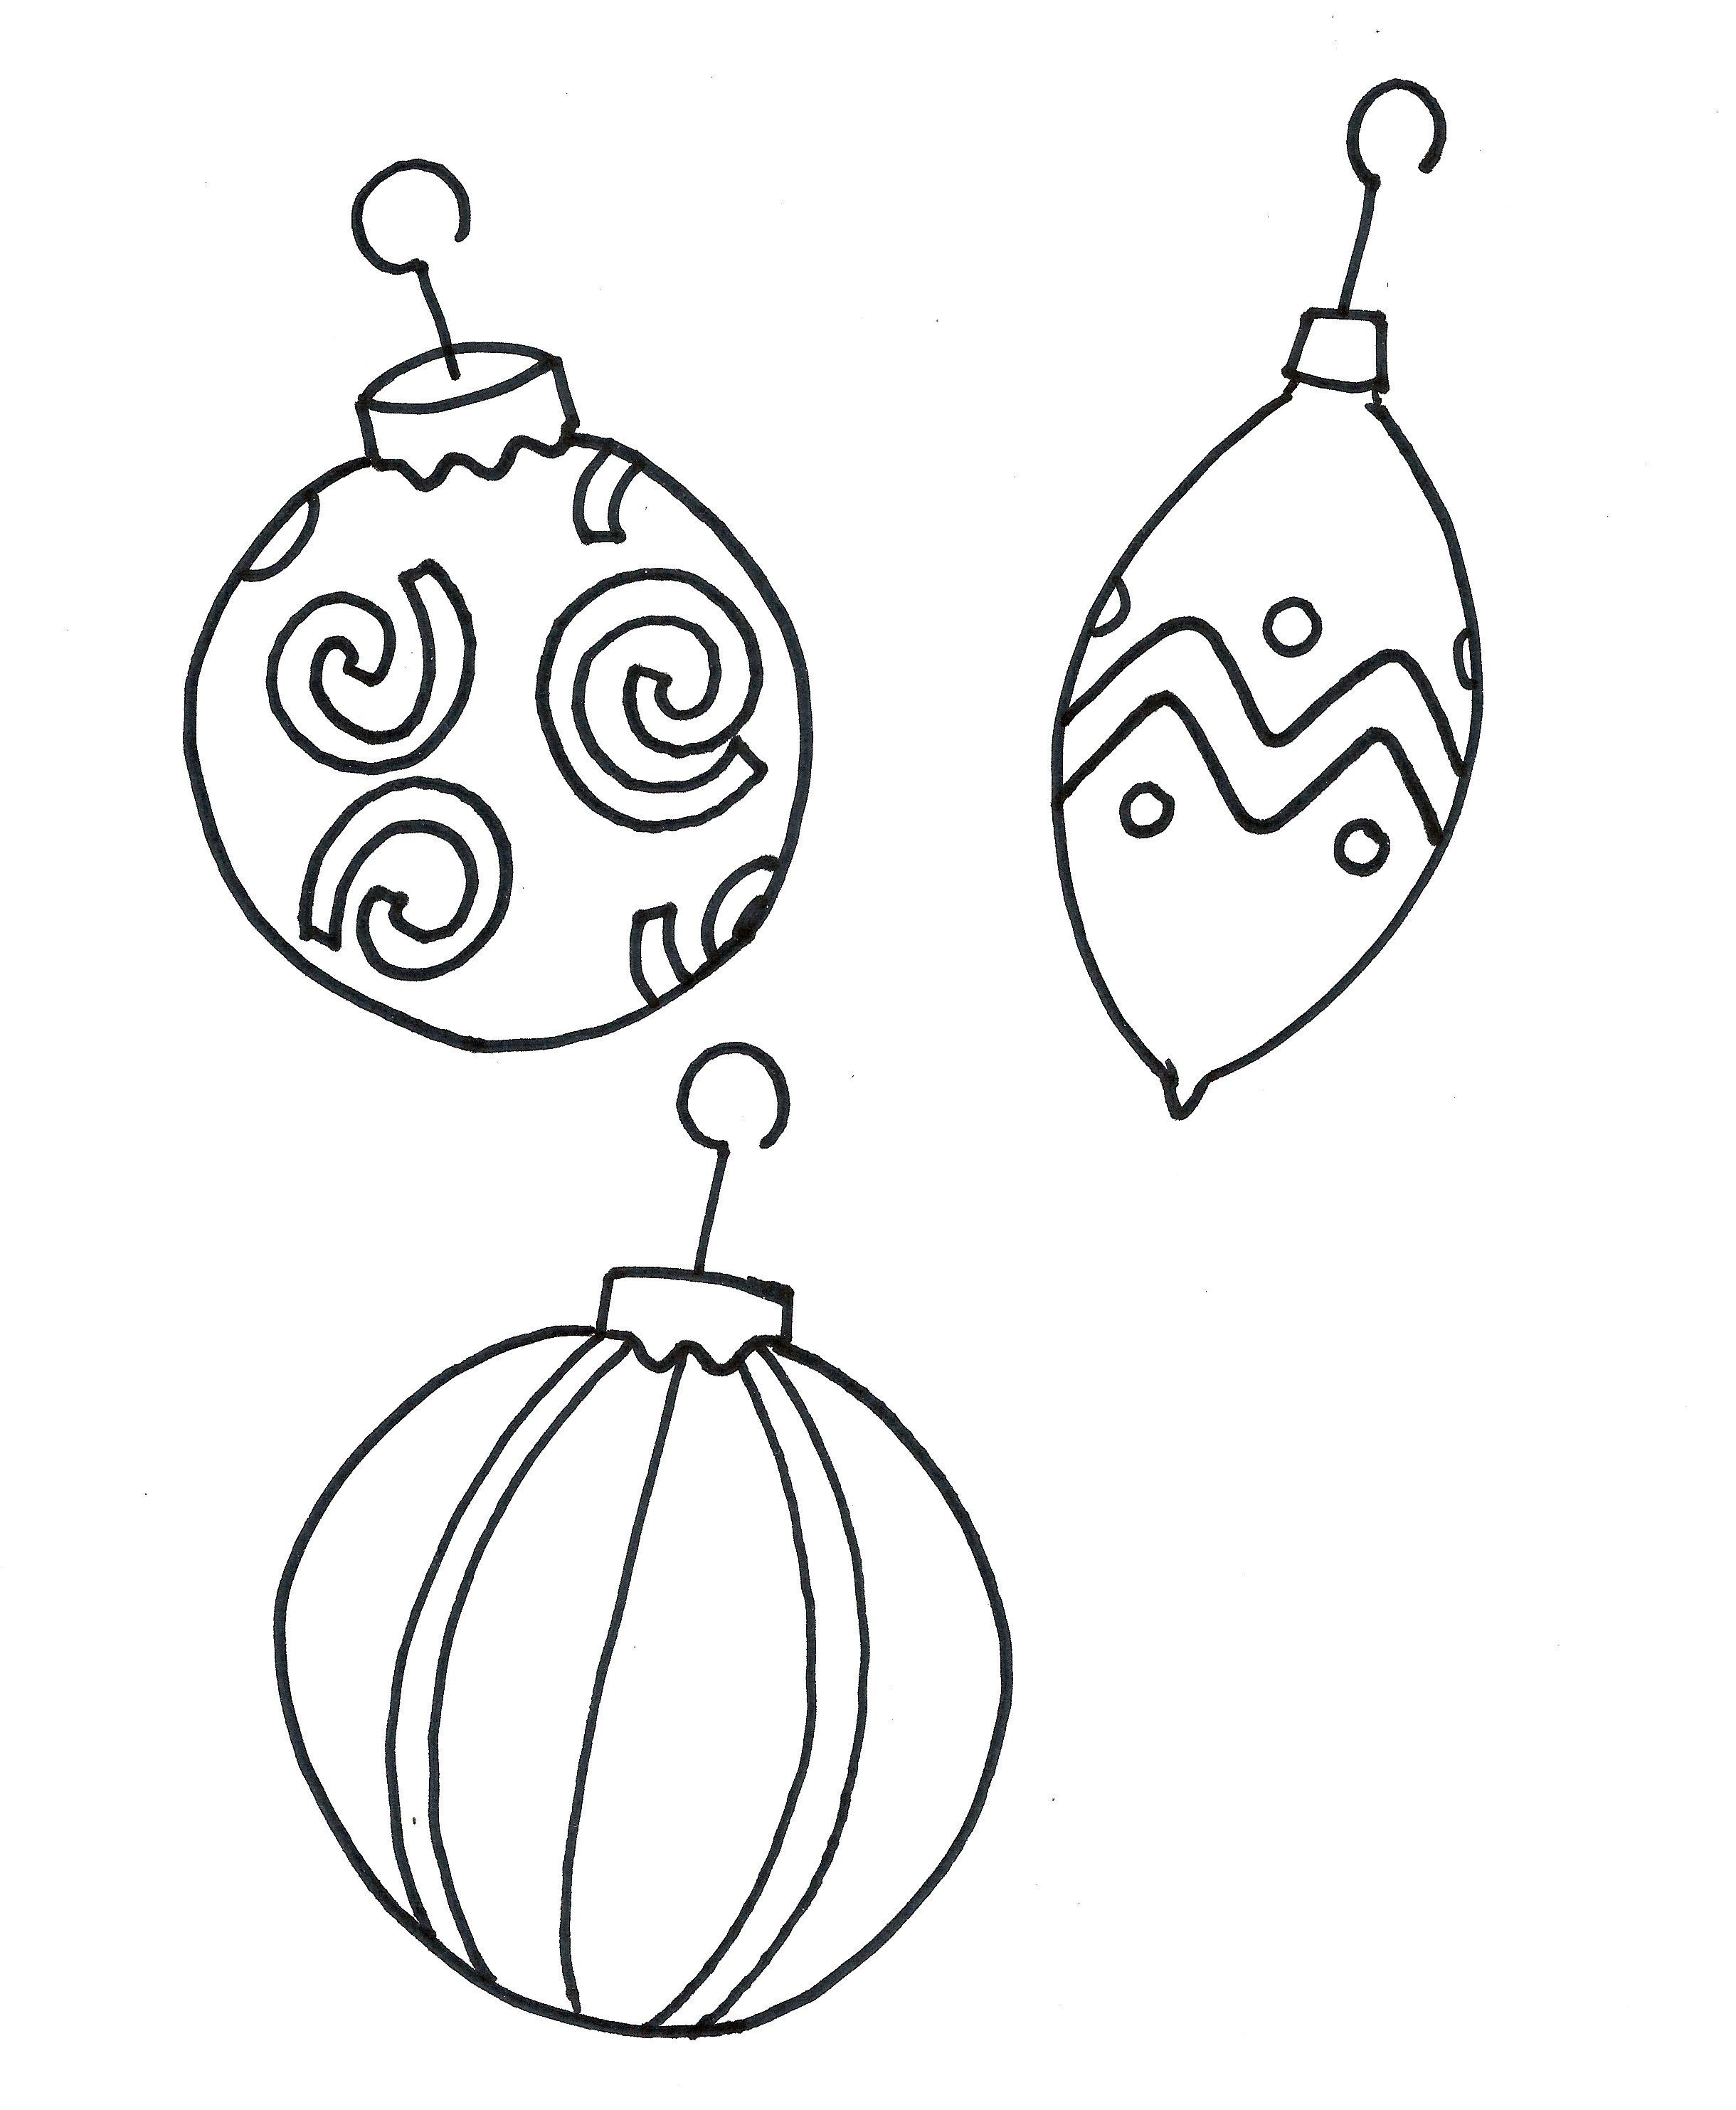 Printable Coloring Pages Christmas Ornament Free | Christmas Crafts - Free Printable Christmas Ornament Coloring Pages